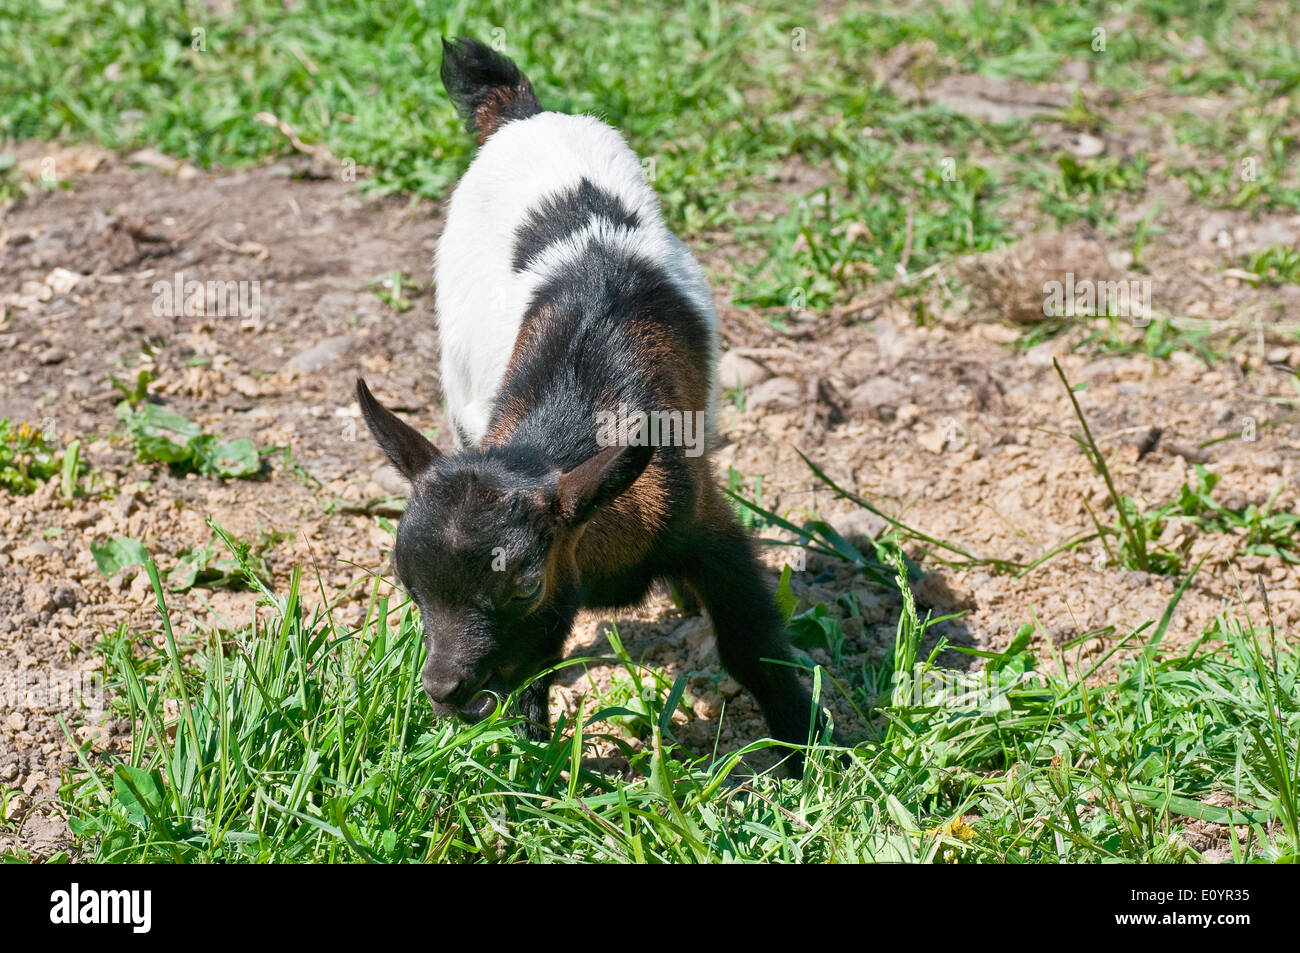 Baby goat standing in a grass field Stock Photo